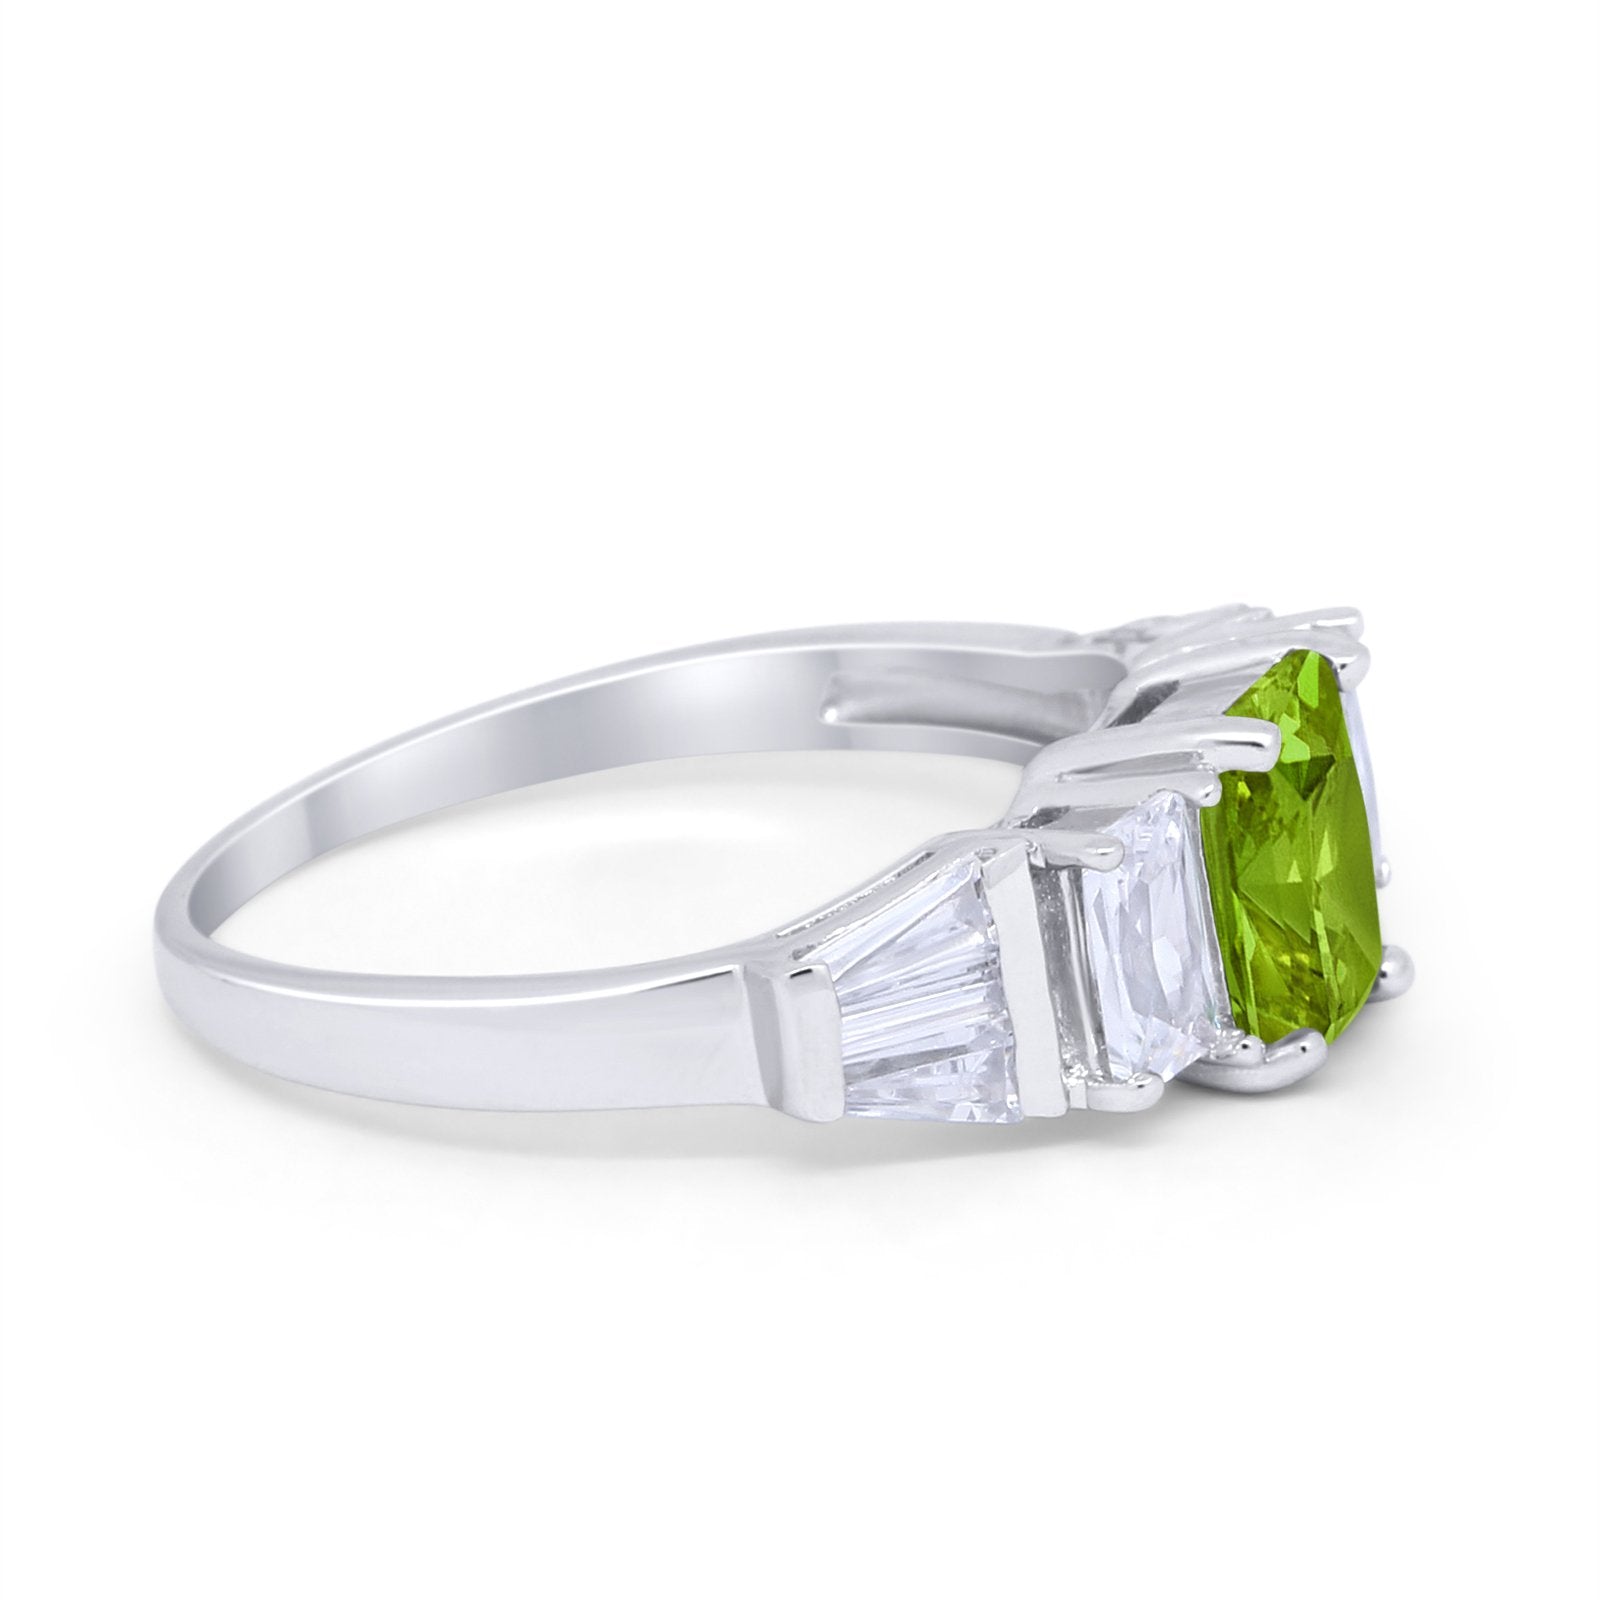 Engagement Ring Radiant Cut Simulated Peridot CZ 925 Sterling Silver